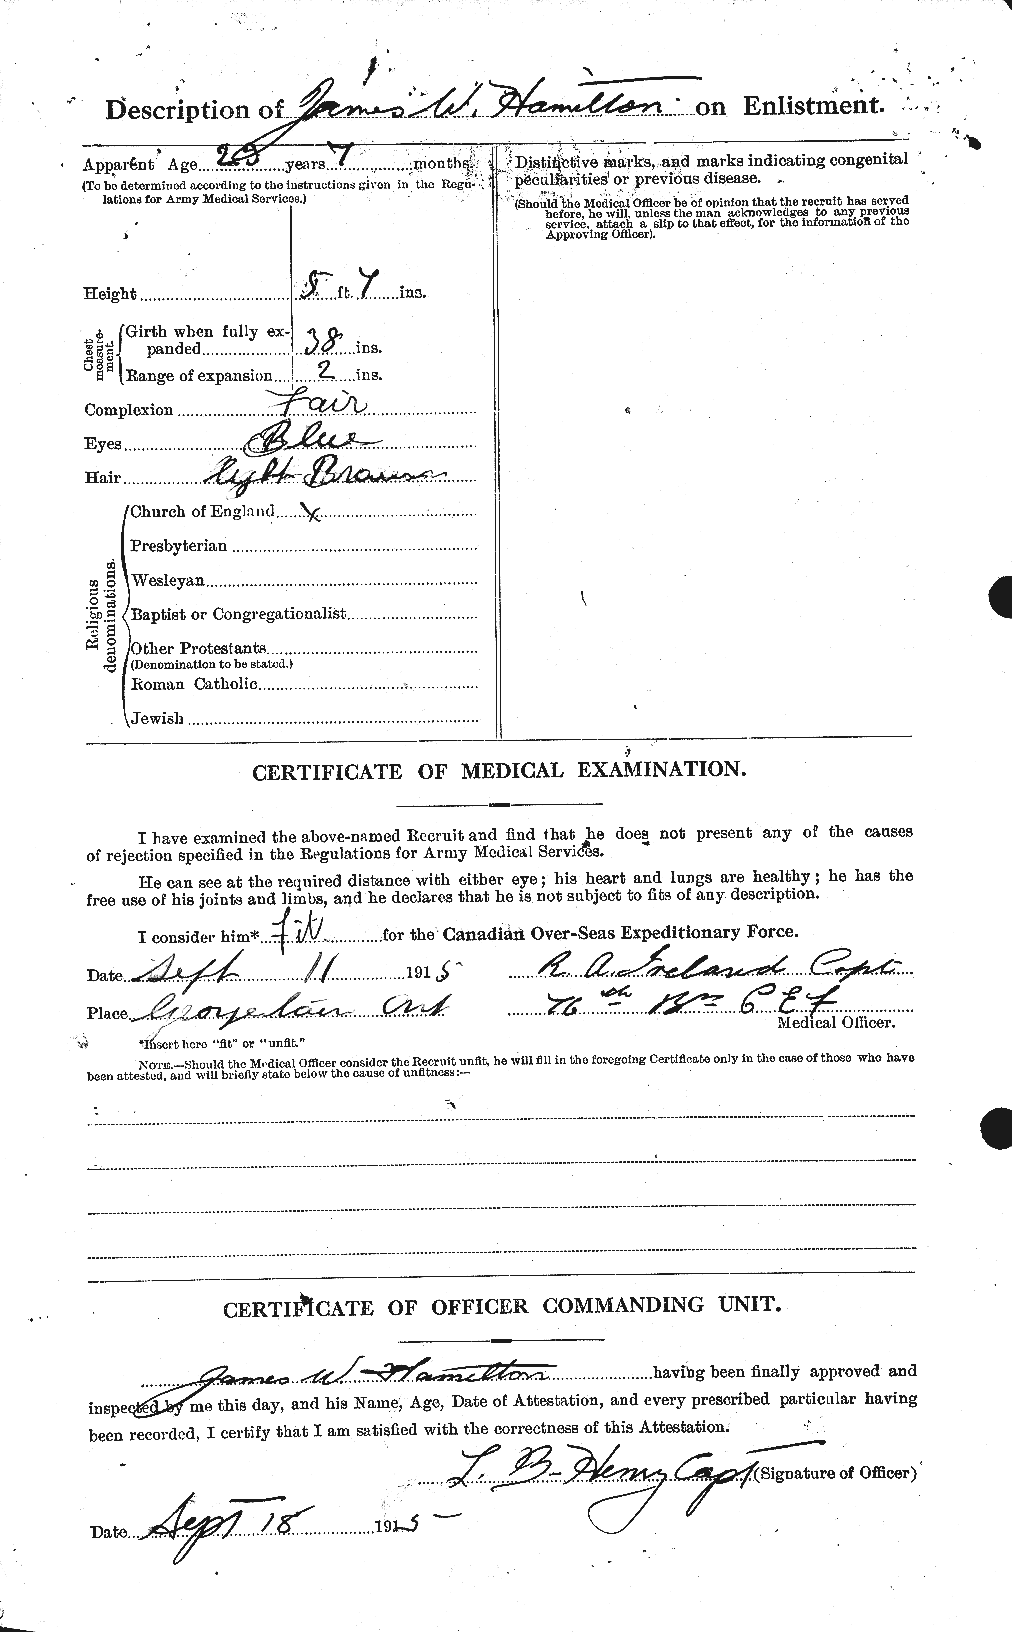 Personnel Records of the First World War - CEF 373010b